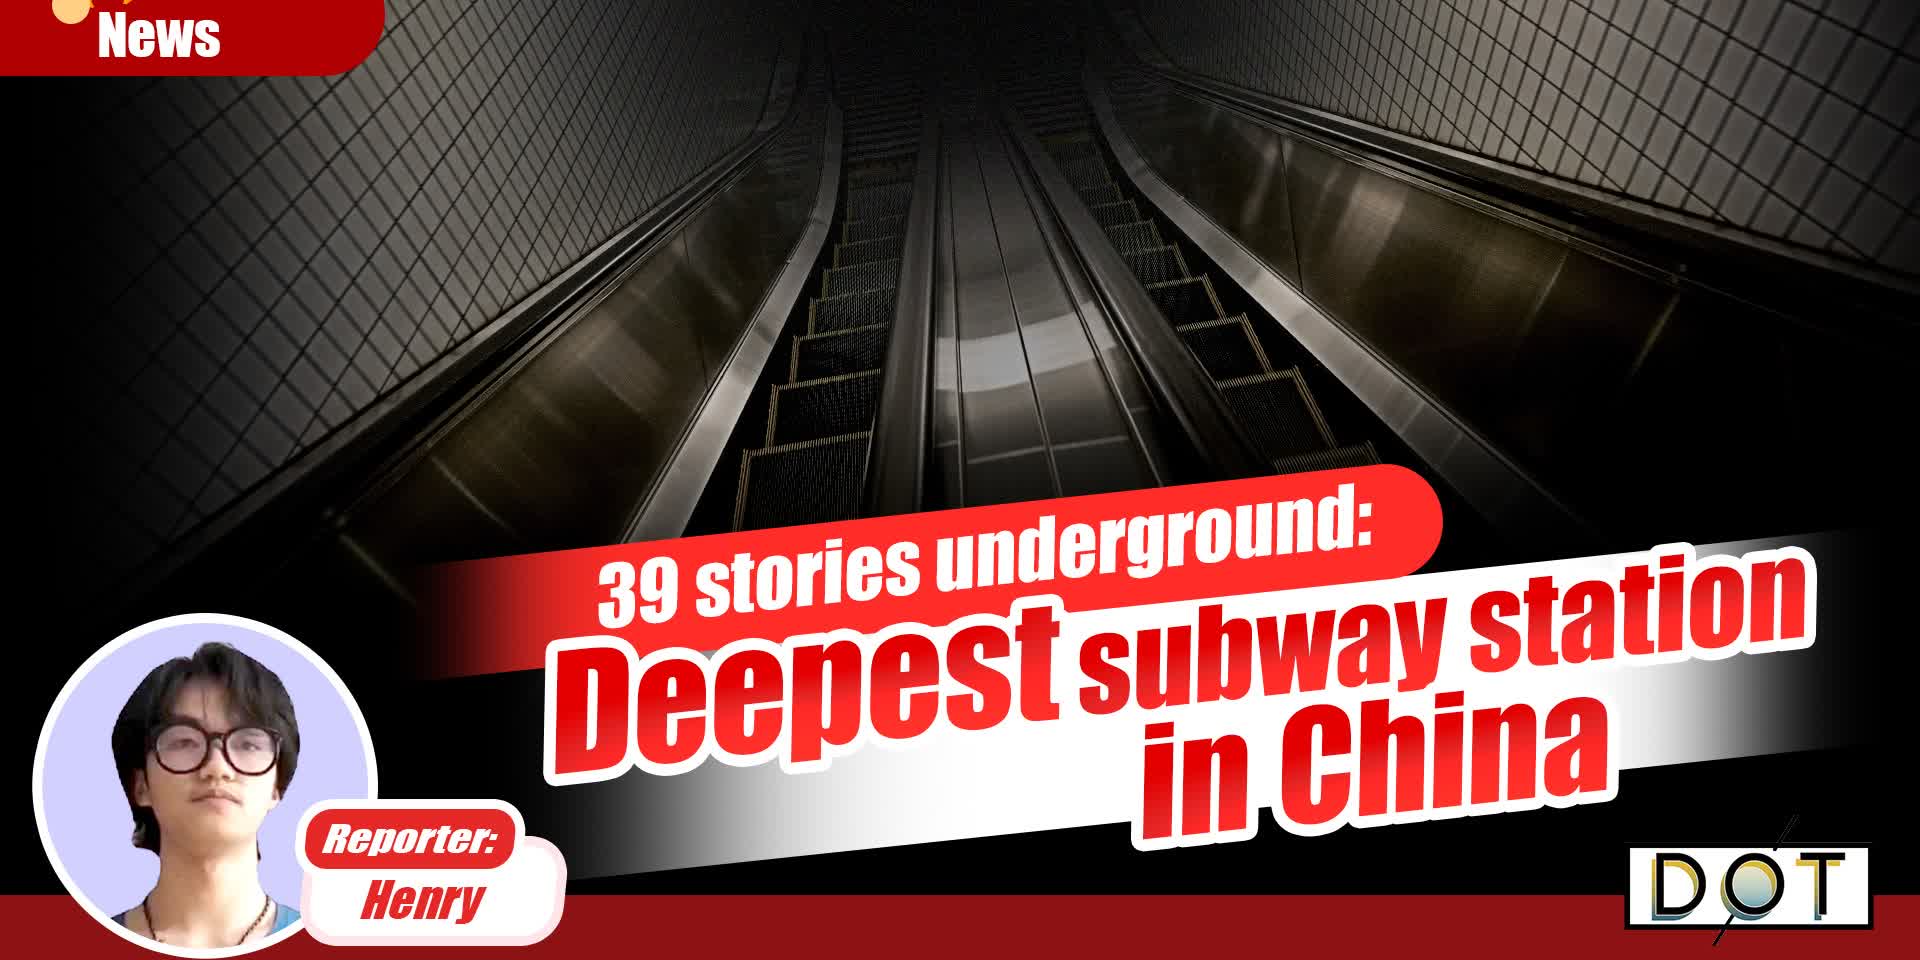 1-minute News | 39 stories underground: Deepest subway station in China